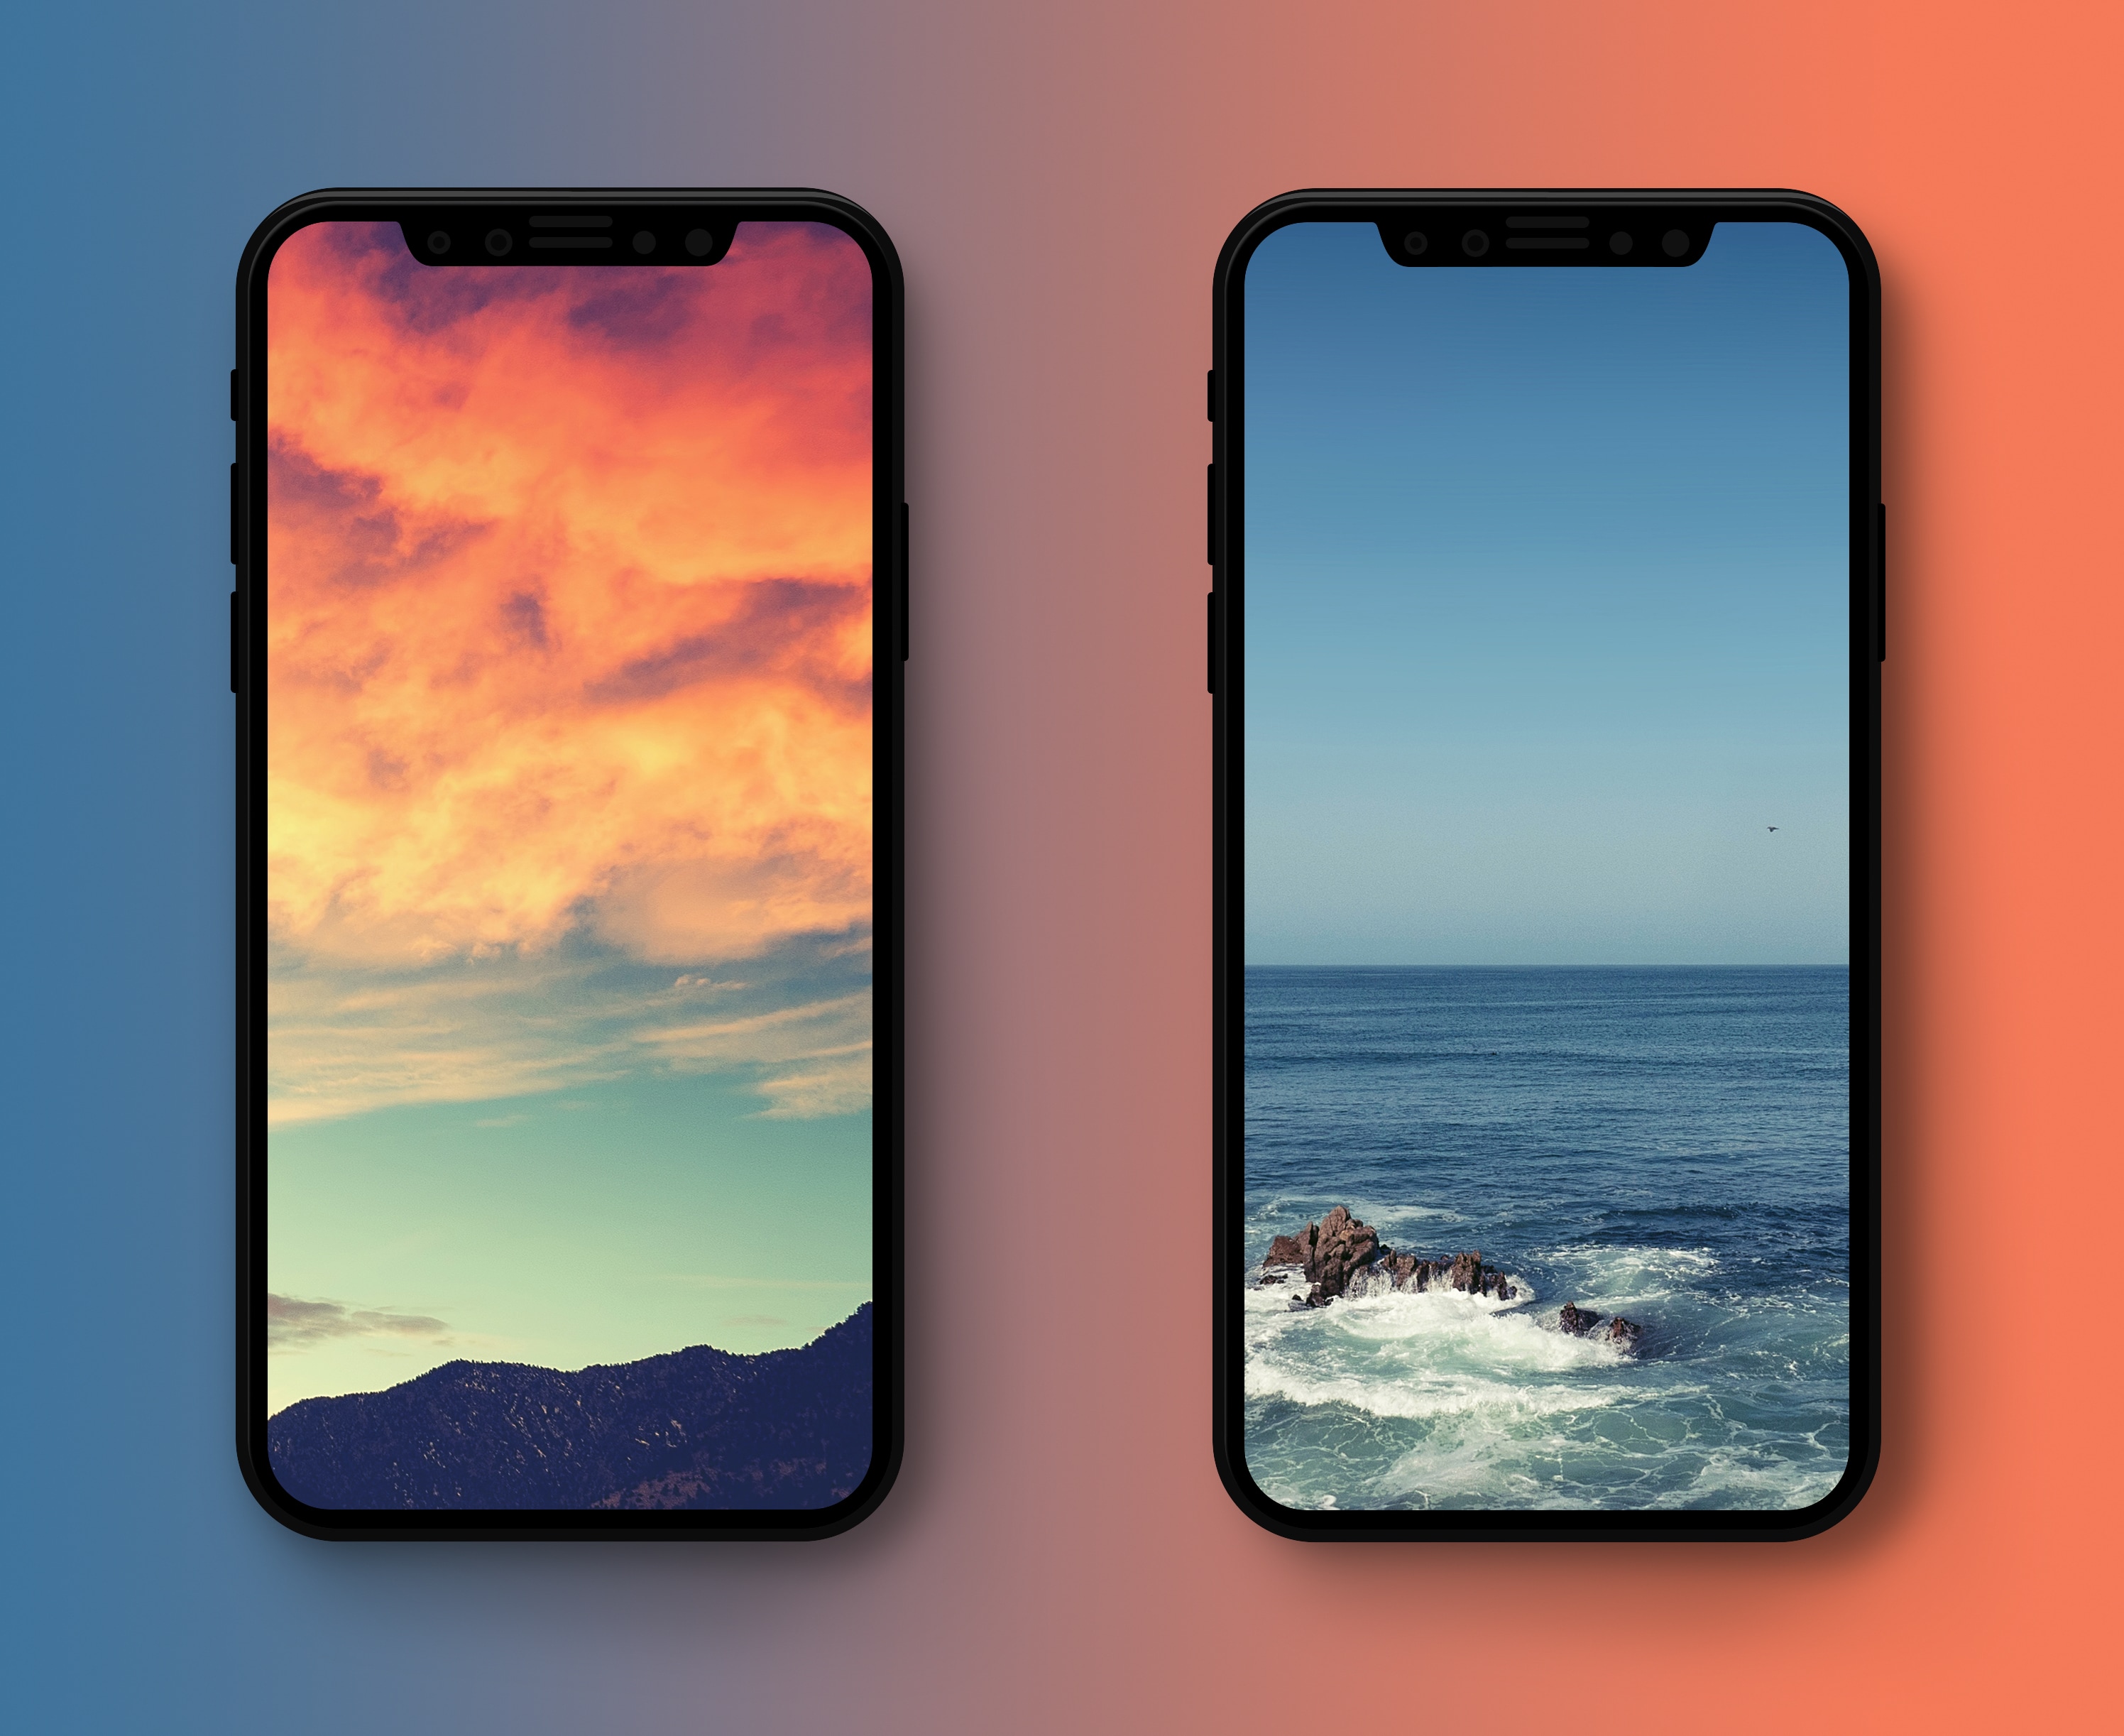 Video: hands-on with exclusive iPhone X wallpapers